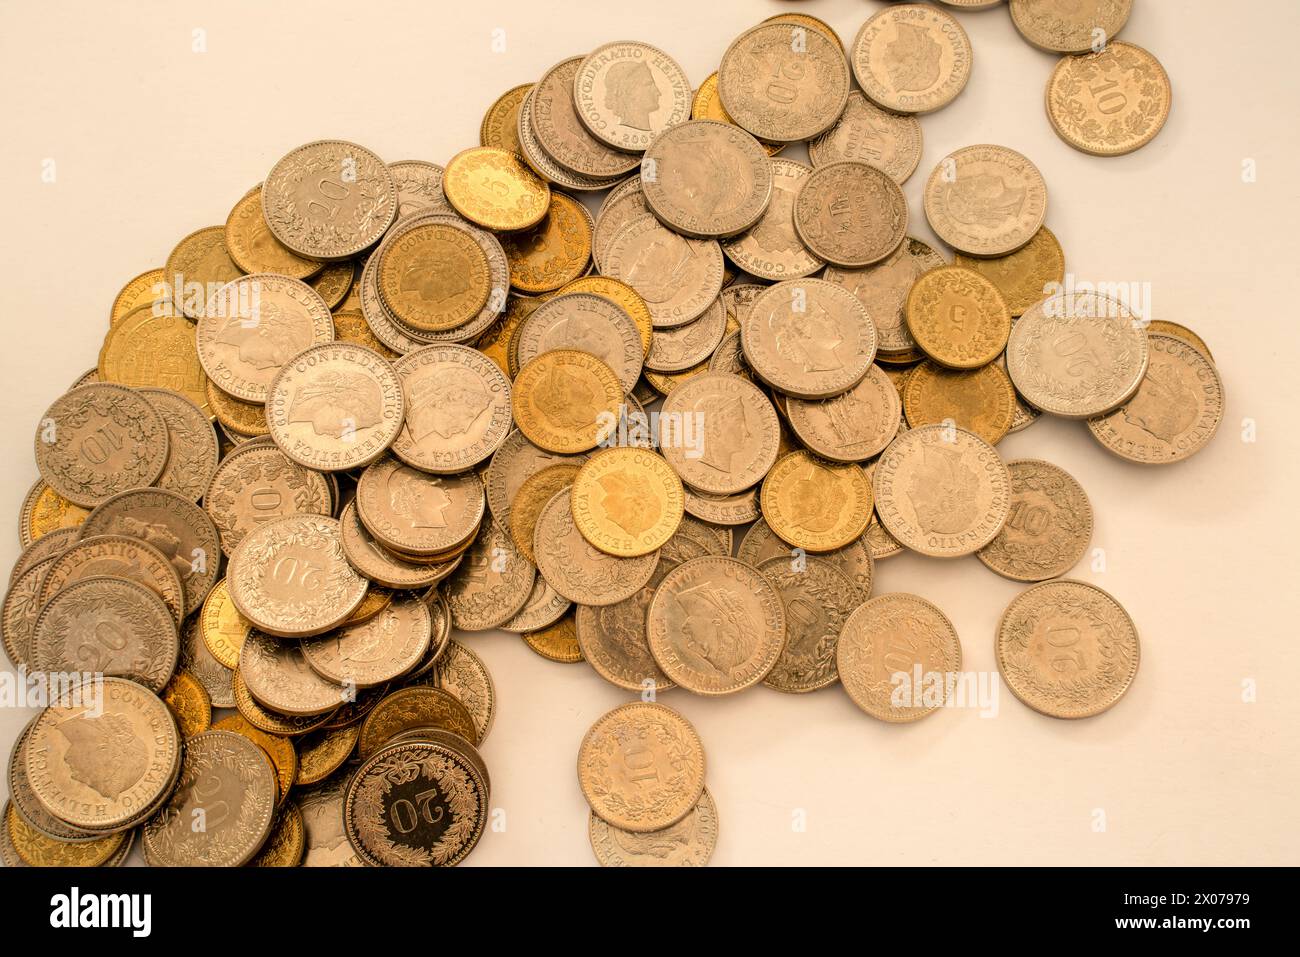 Pile of coins in different sizes lying on the table before getting counted. Swiss money. Stock Photo